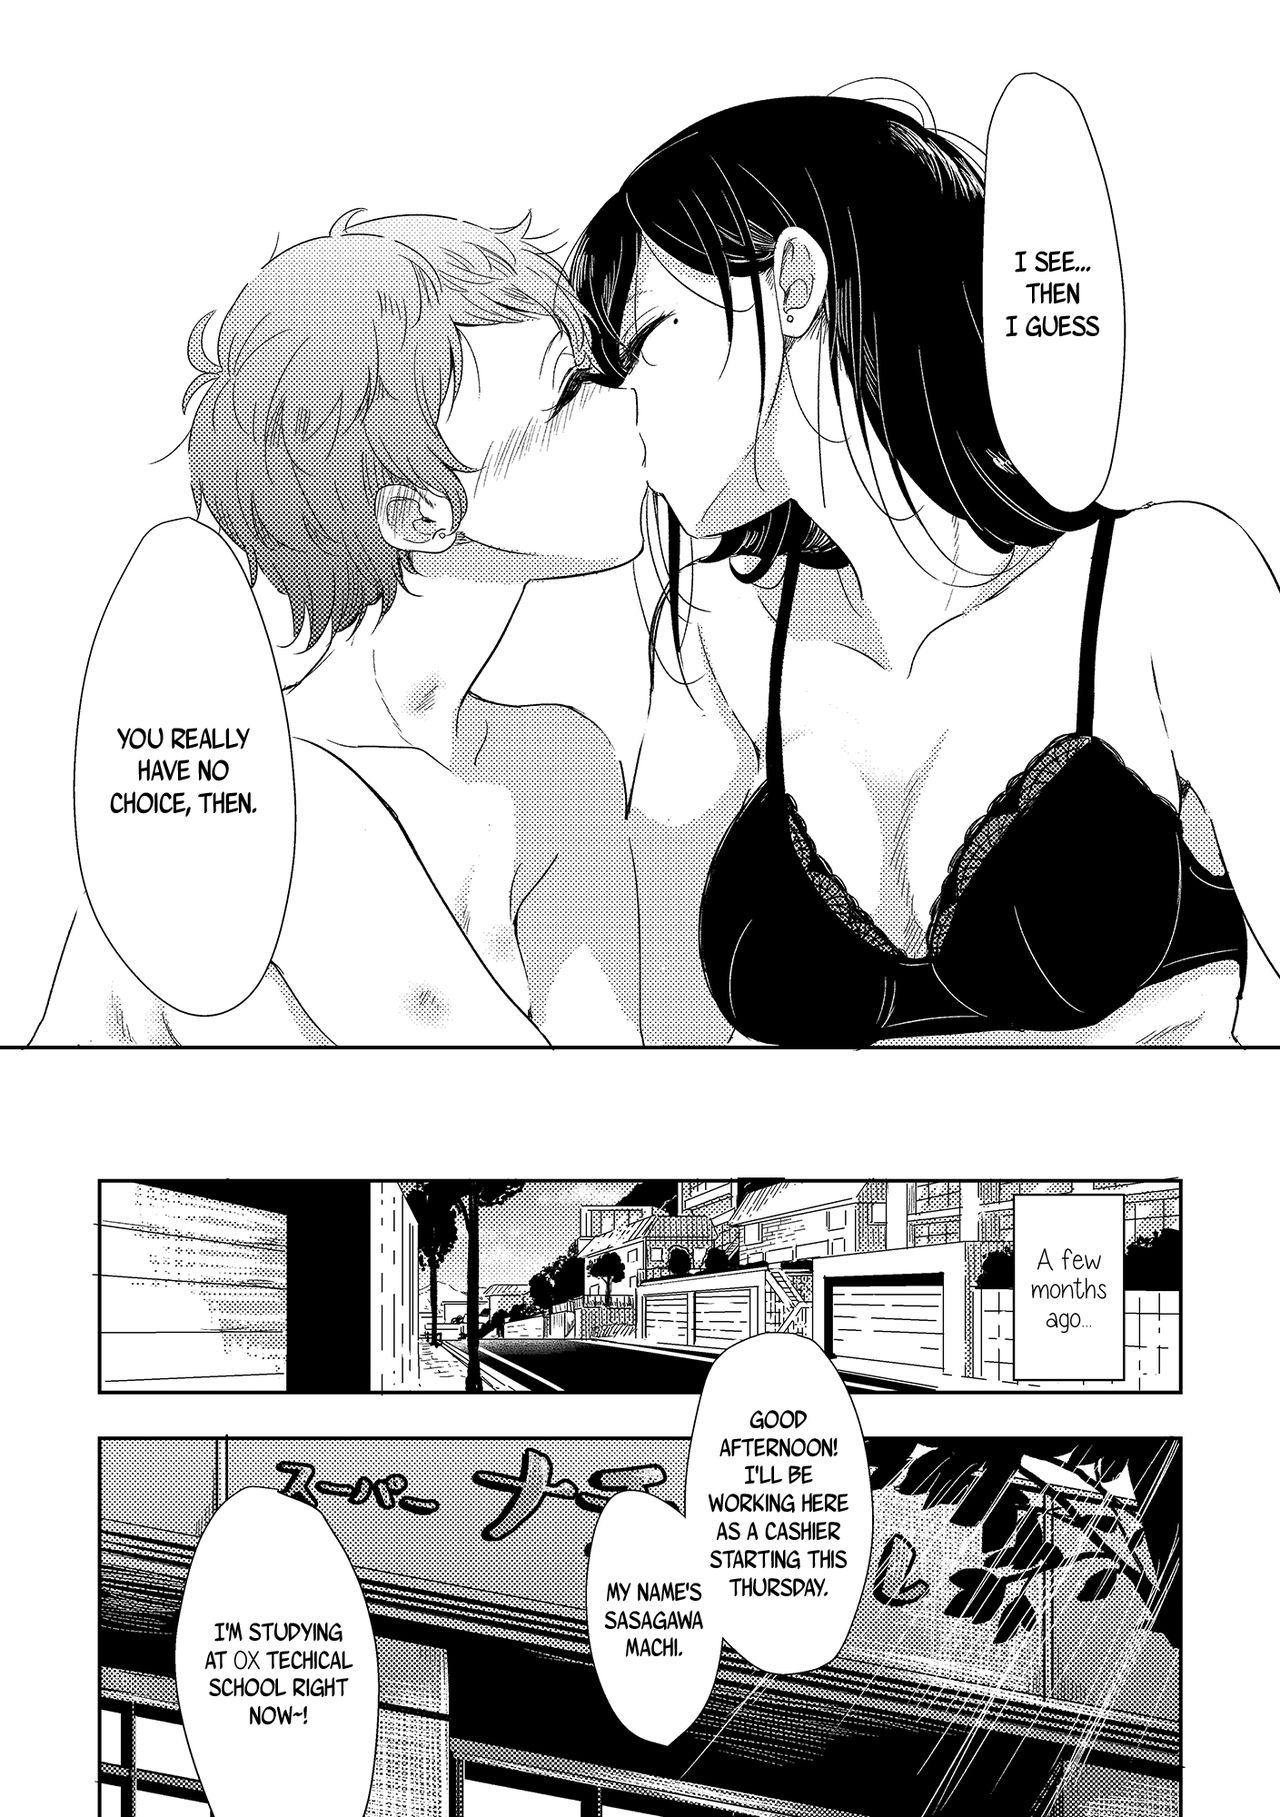 Ejaculations The Mysterious Kamiura-san - Original Beauty - Page 3